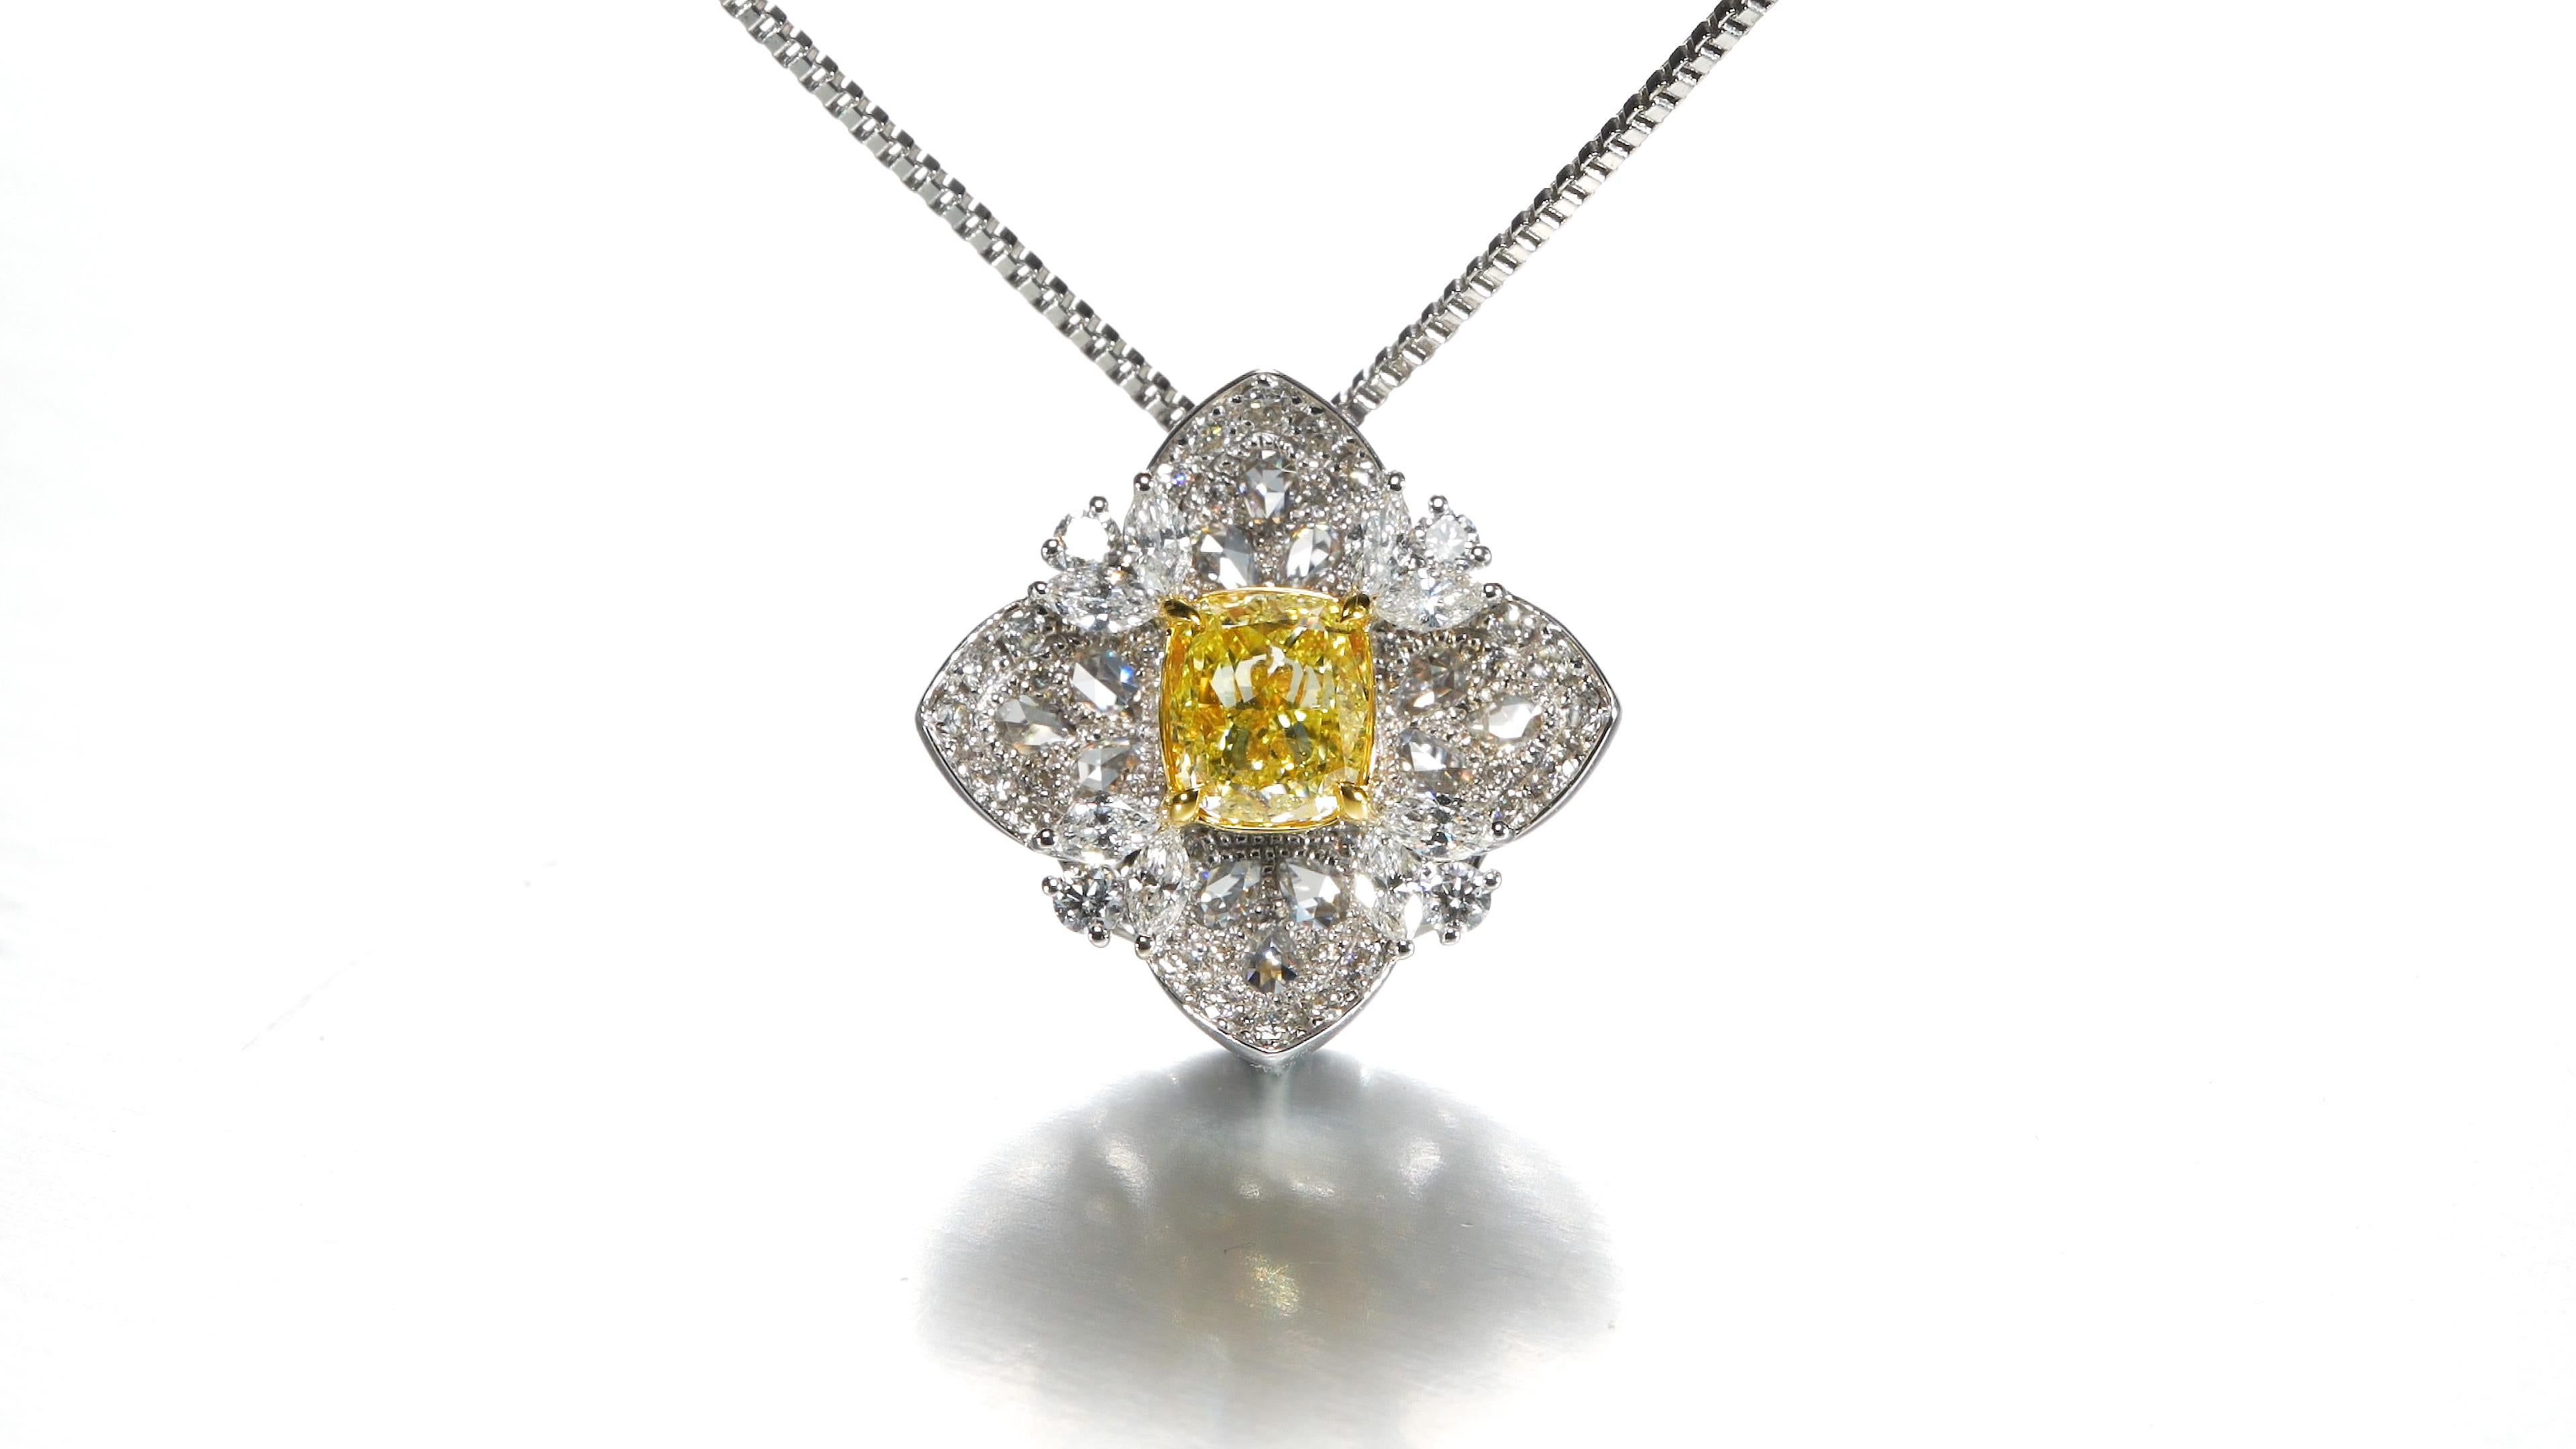 GIA Certified 0.70ct Natural Fancy Intense Yellow Cushion Shape Diamond, a radiant gem that takes center stage in this extraordinary creation. Graced by the esteemed certification of the Gemological Institute of America (GIA), this diamond is a